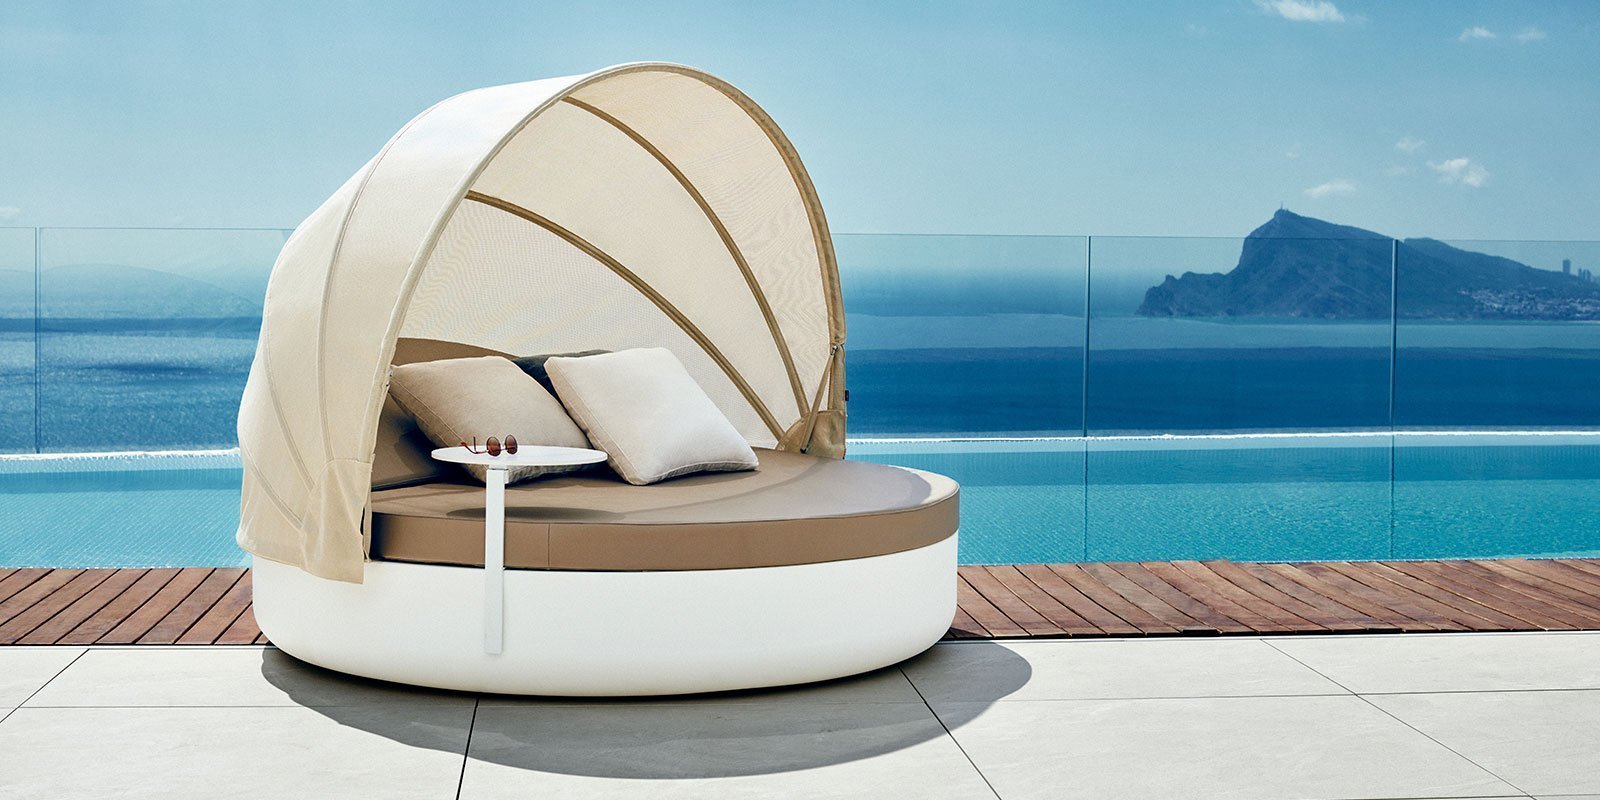 ULM MOON DAYBED WITH SUNROOF